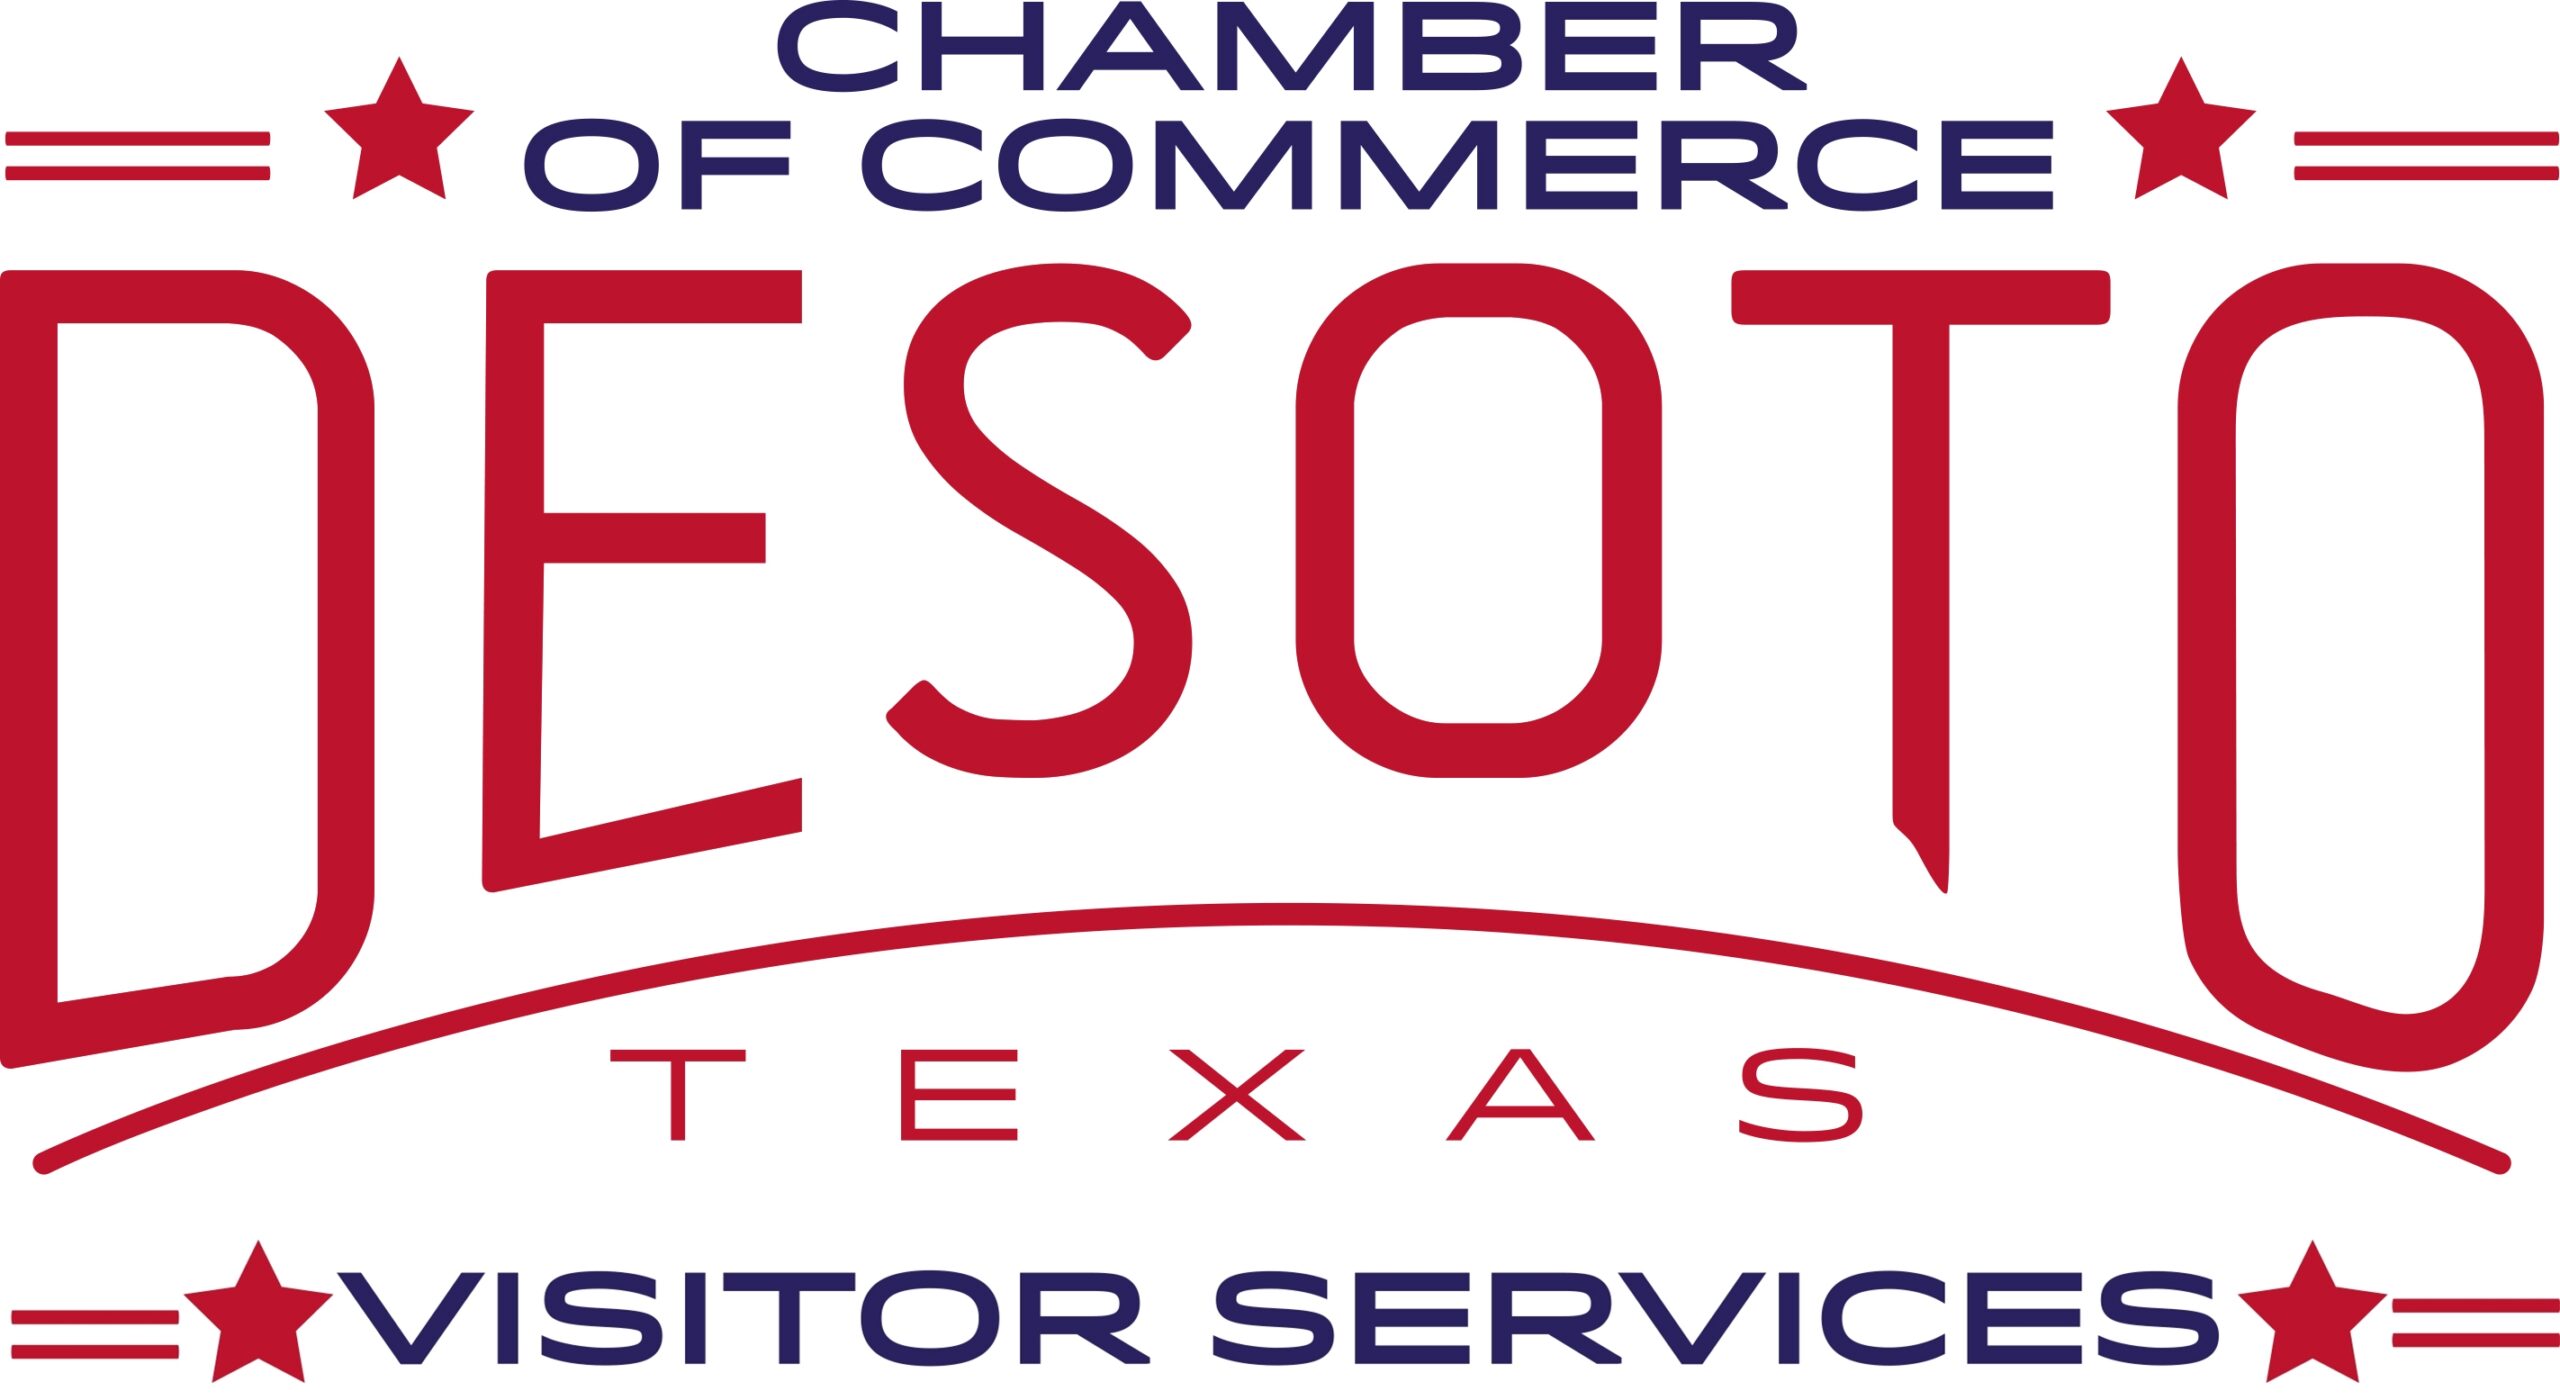 PRESS RELEASE: Desoto Chamber of Commerce President Vanessa Sterling, happily joins forces with HVACR FINEST